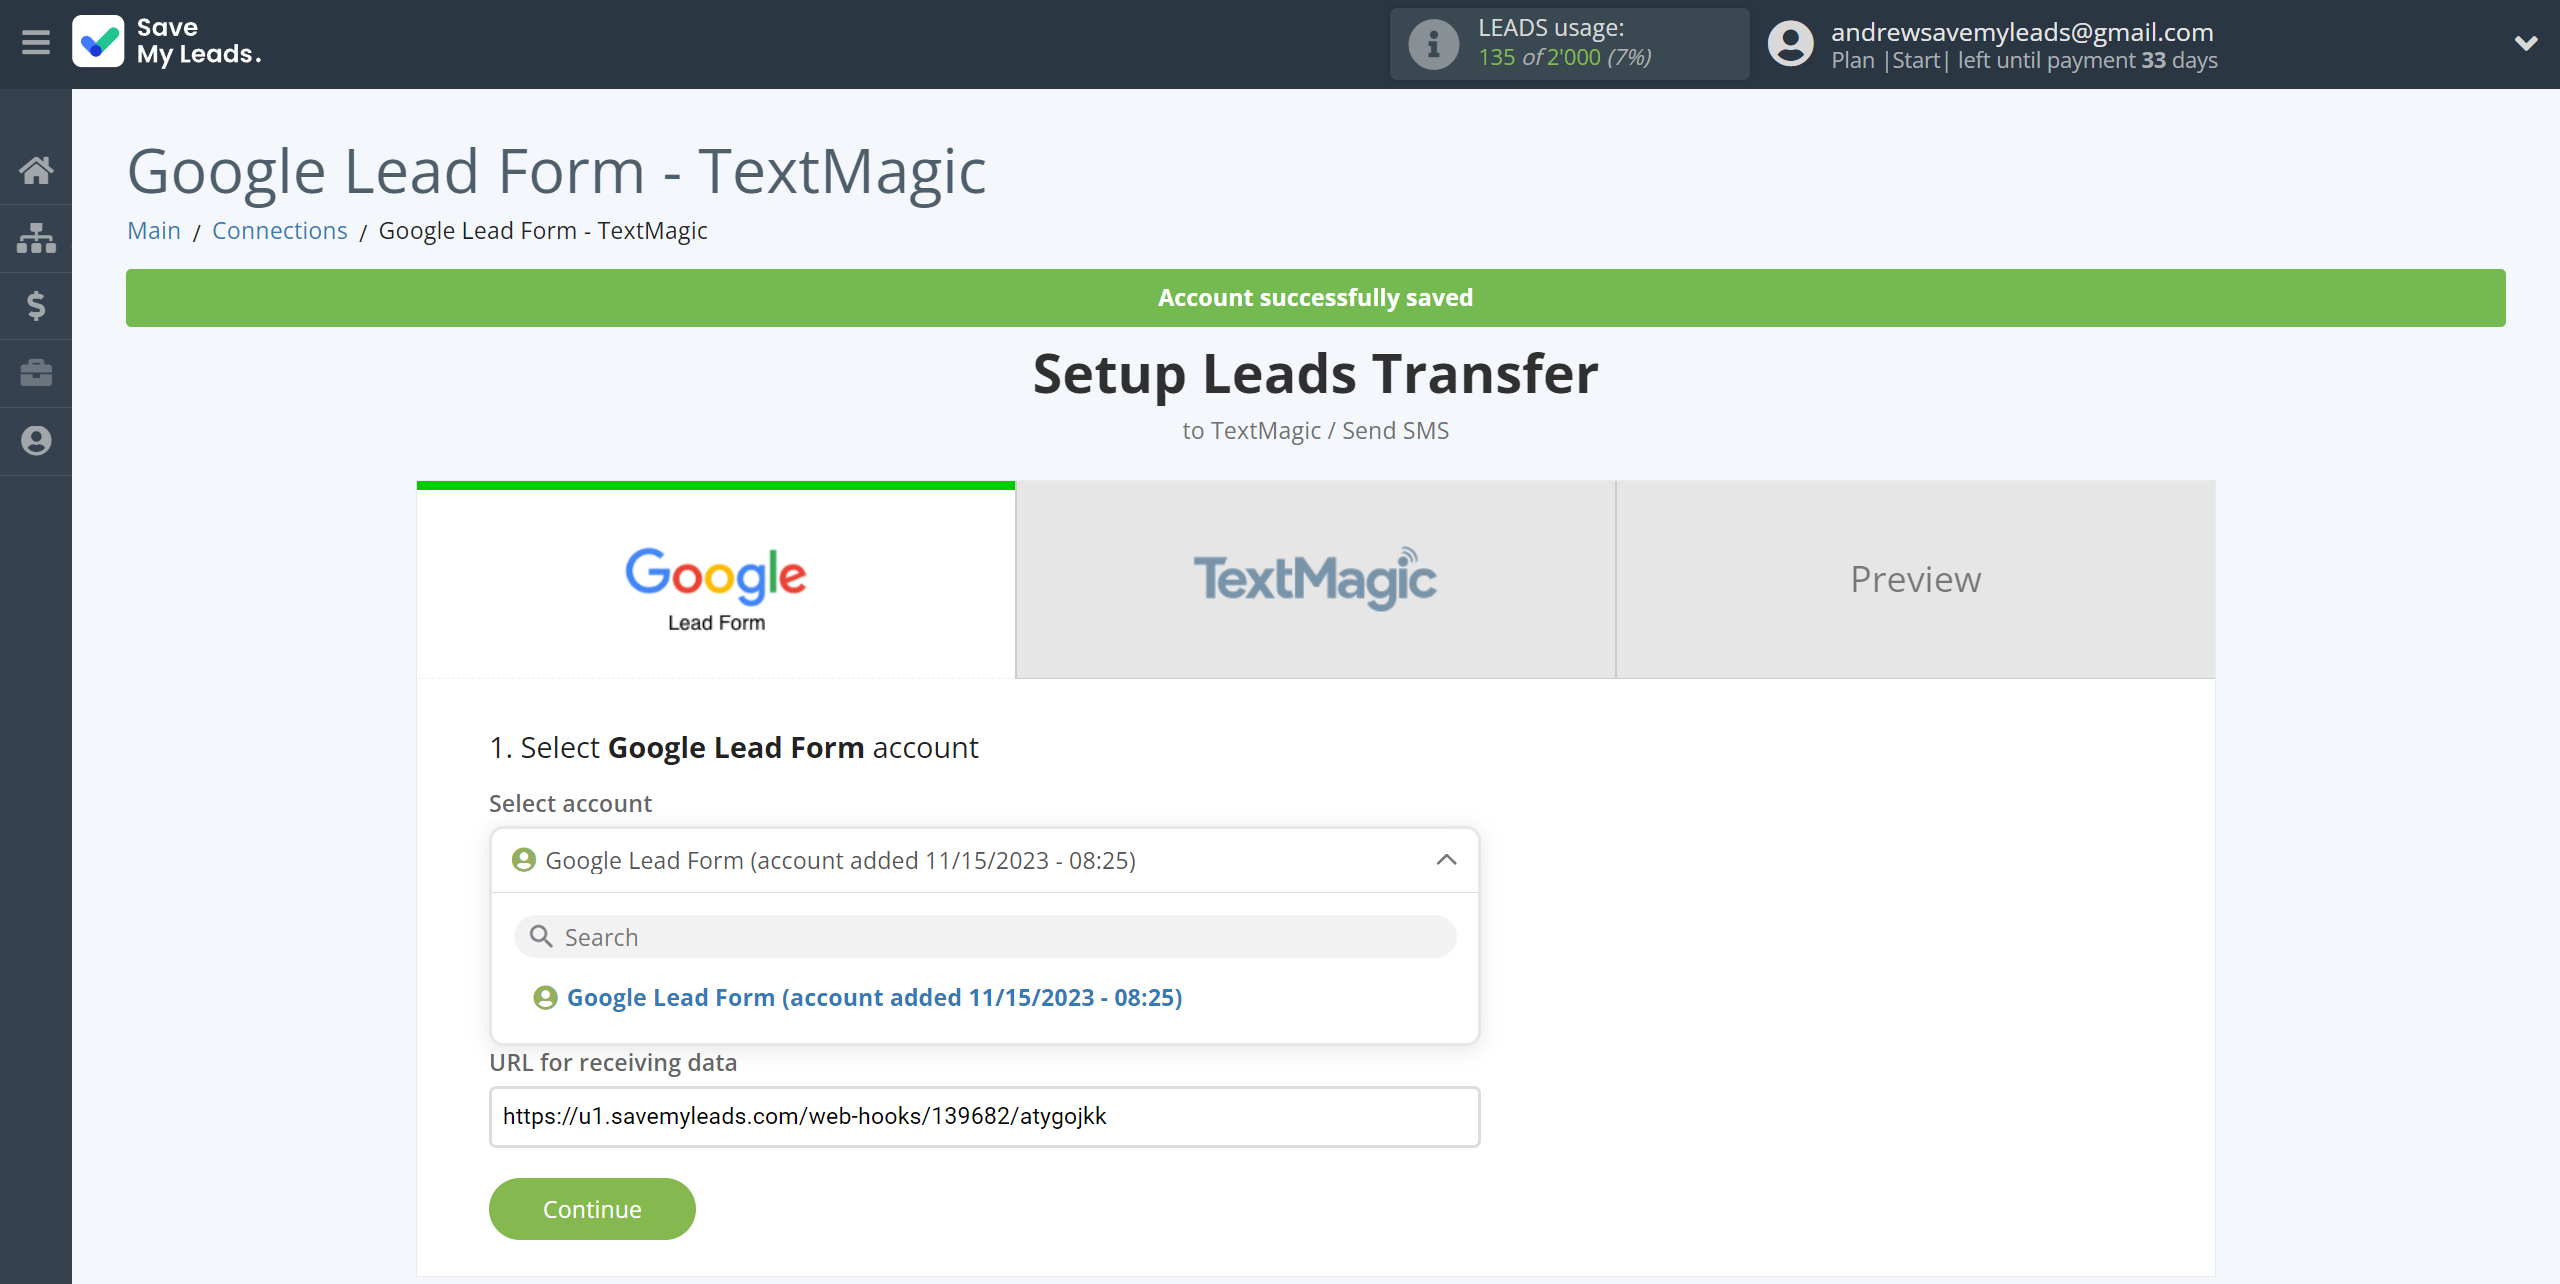 How to Connect Google Lead Form with TextMagic | Data Source account selection